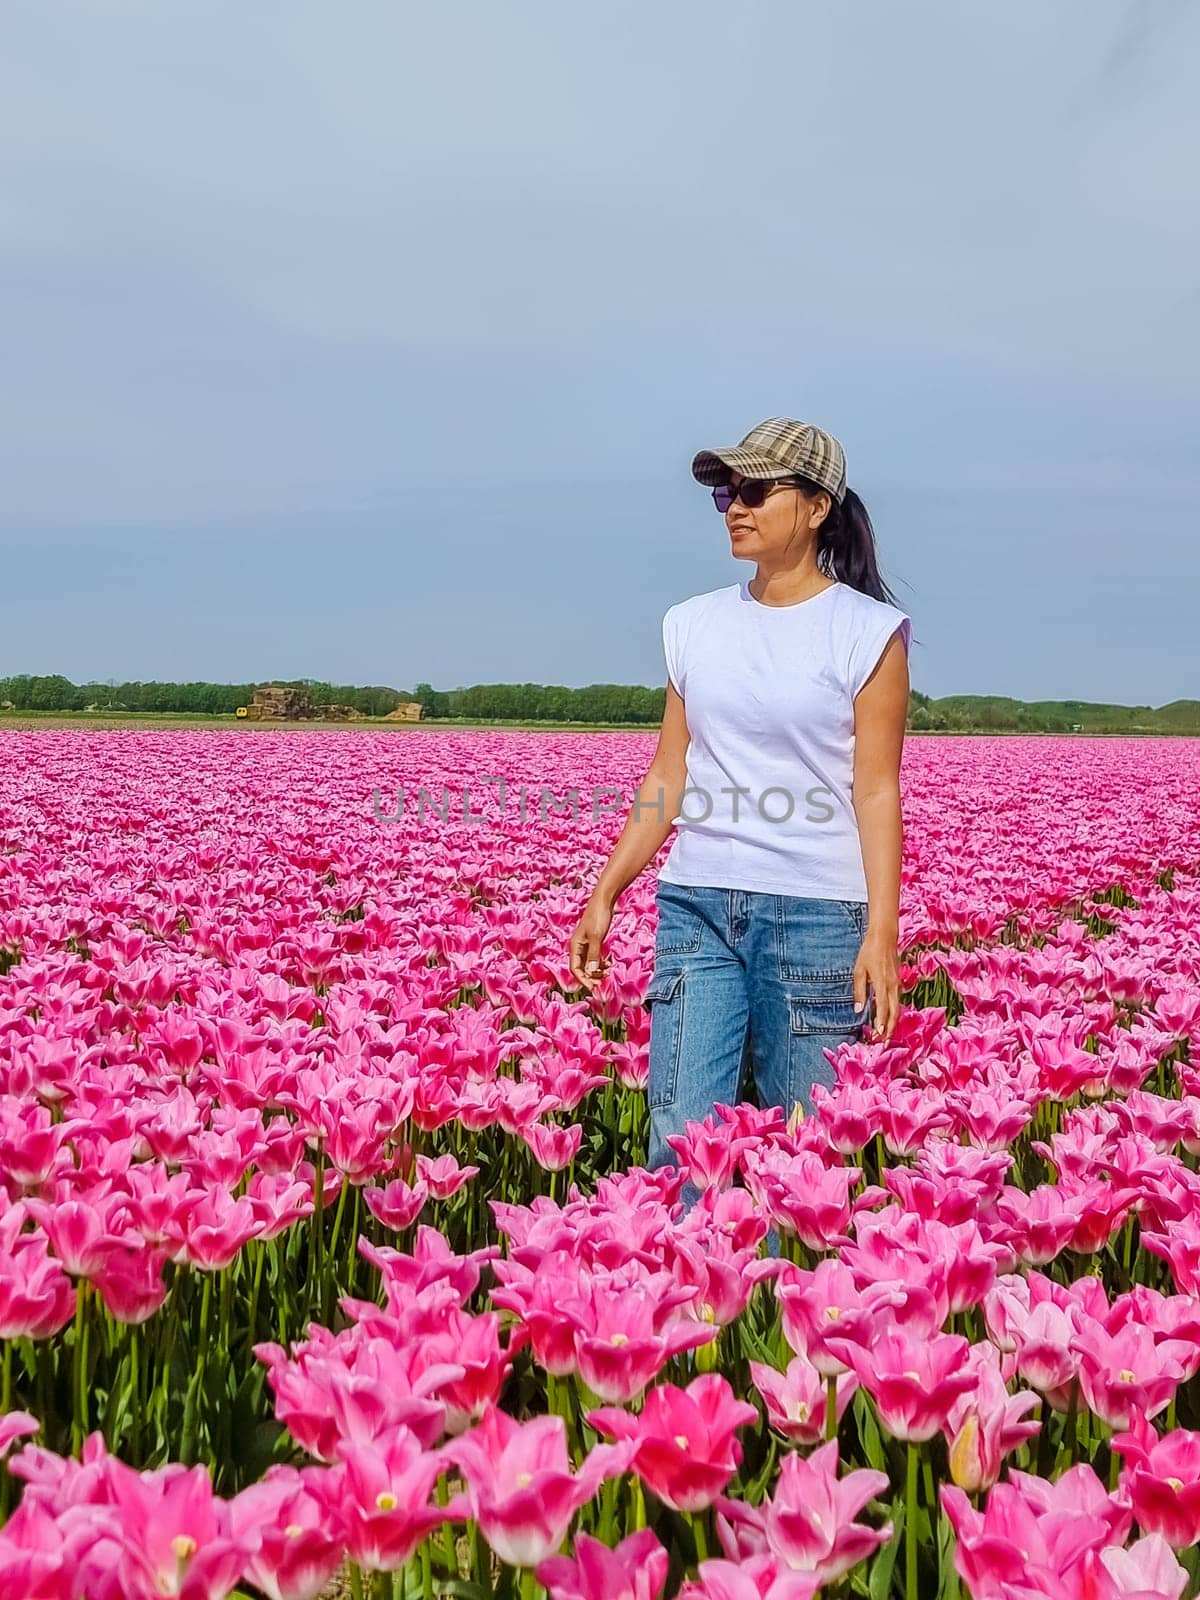 A woman stands elegantly in a field of vibrant pink tulips, surrounded by their beauty and serenity.